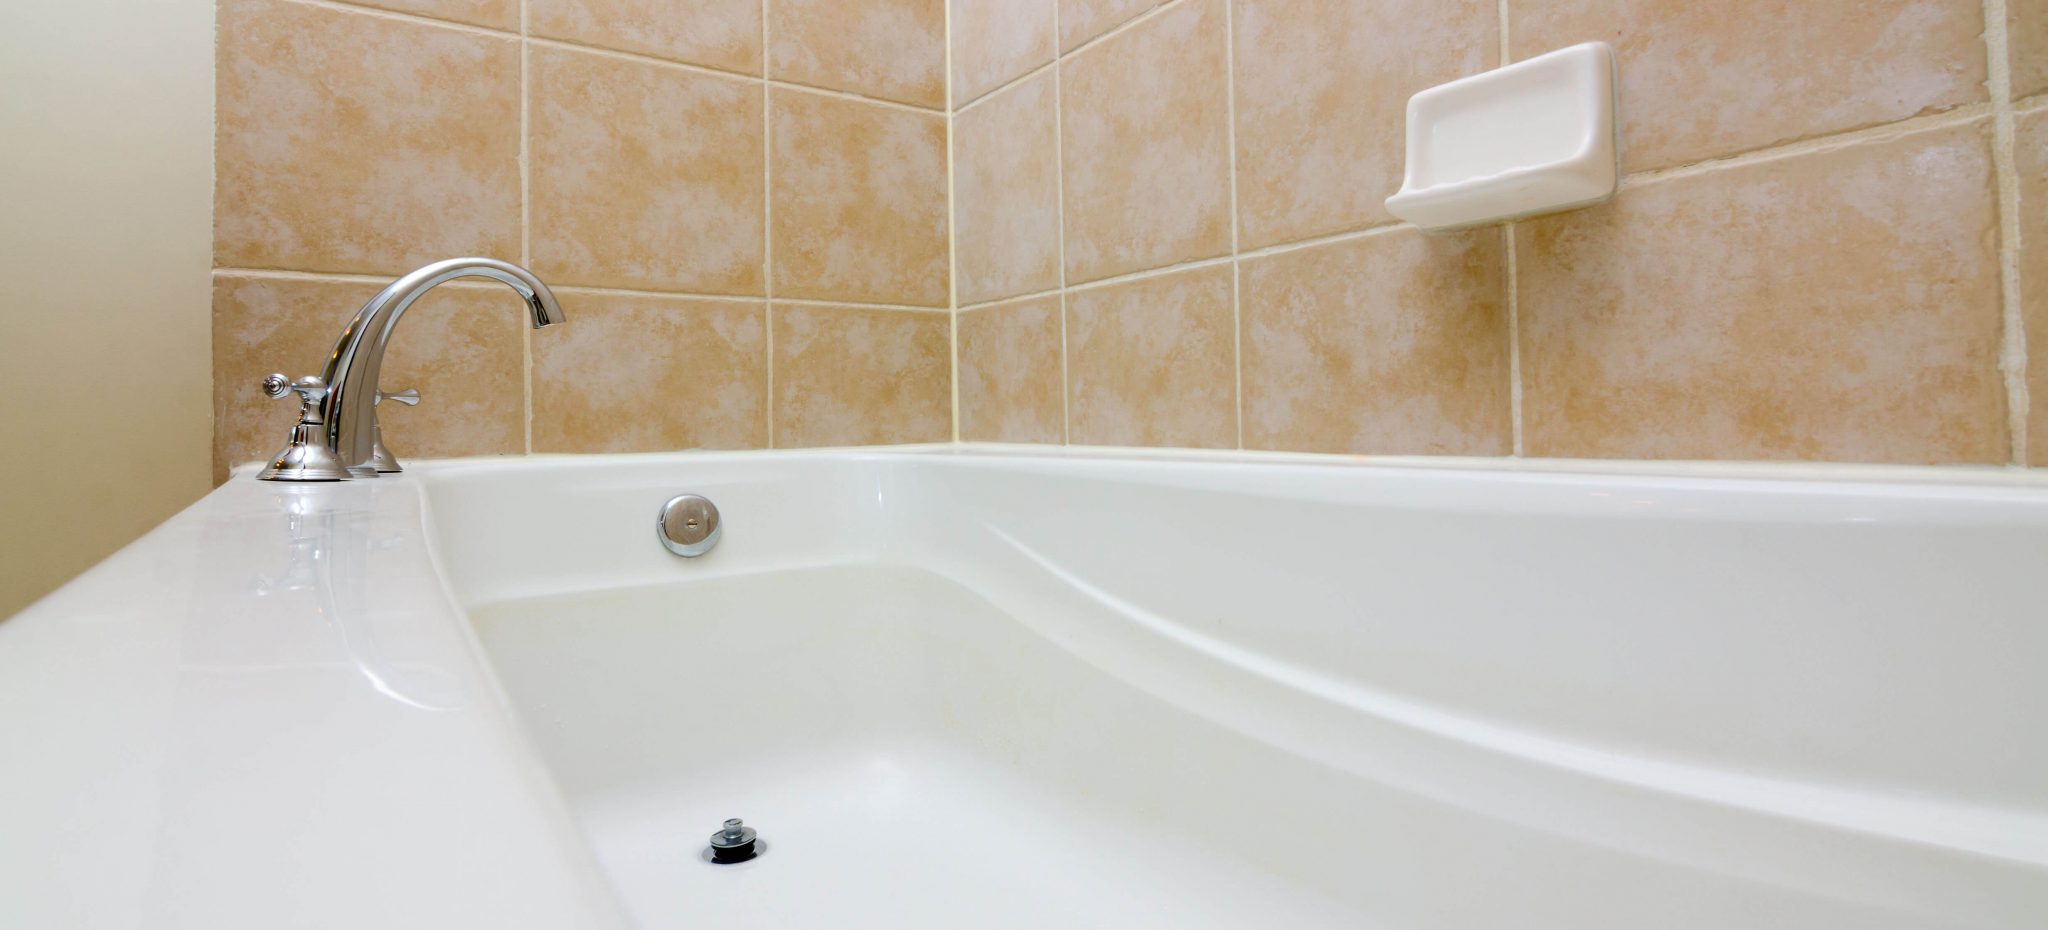 How Far Should A Bathtub Drain Be From The Wall